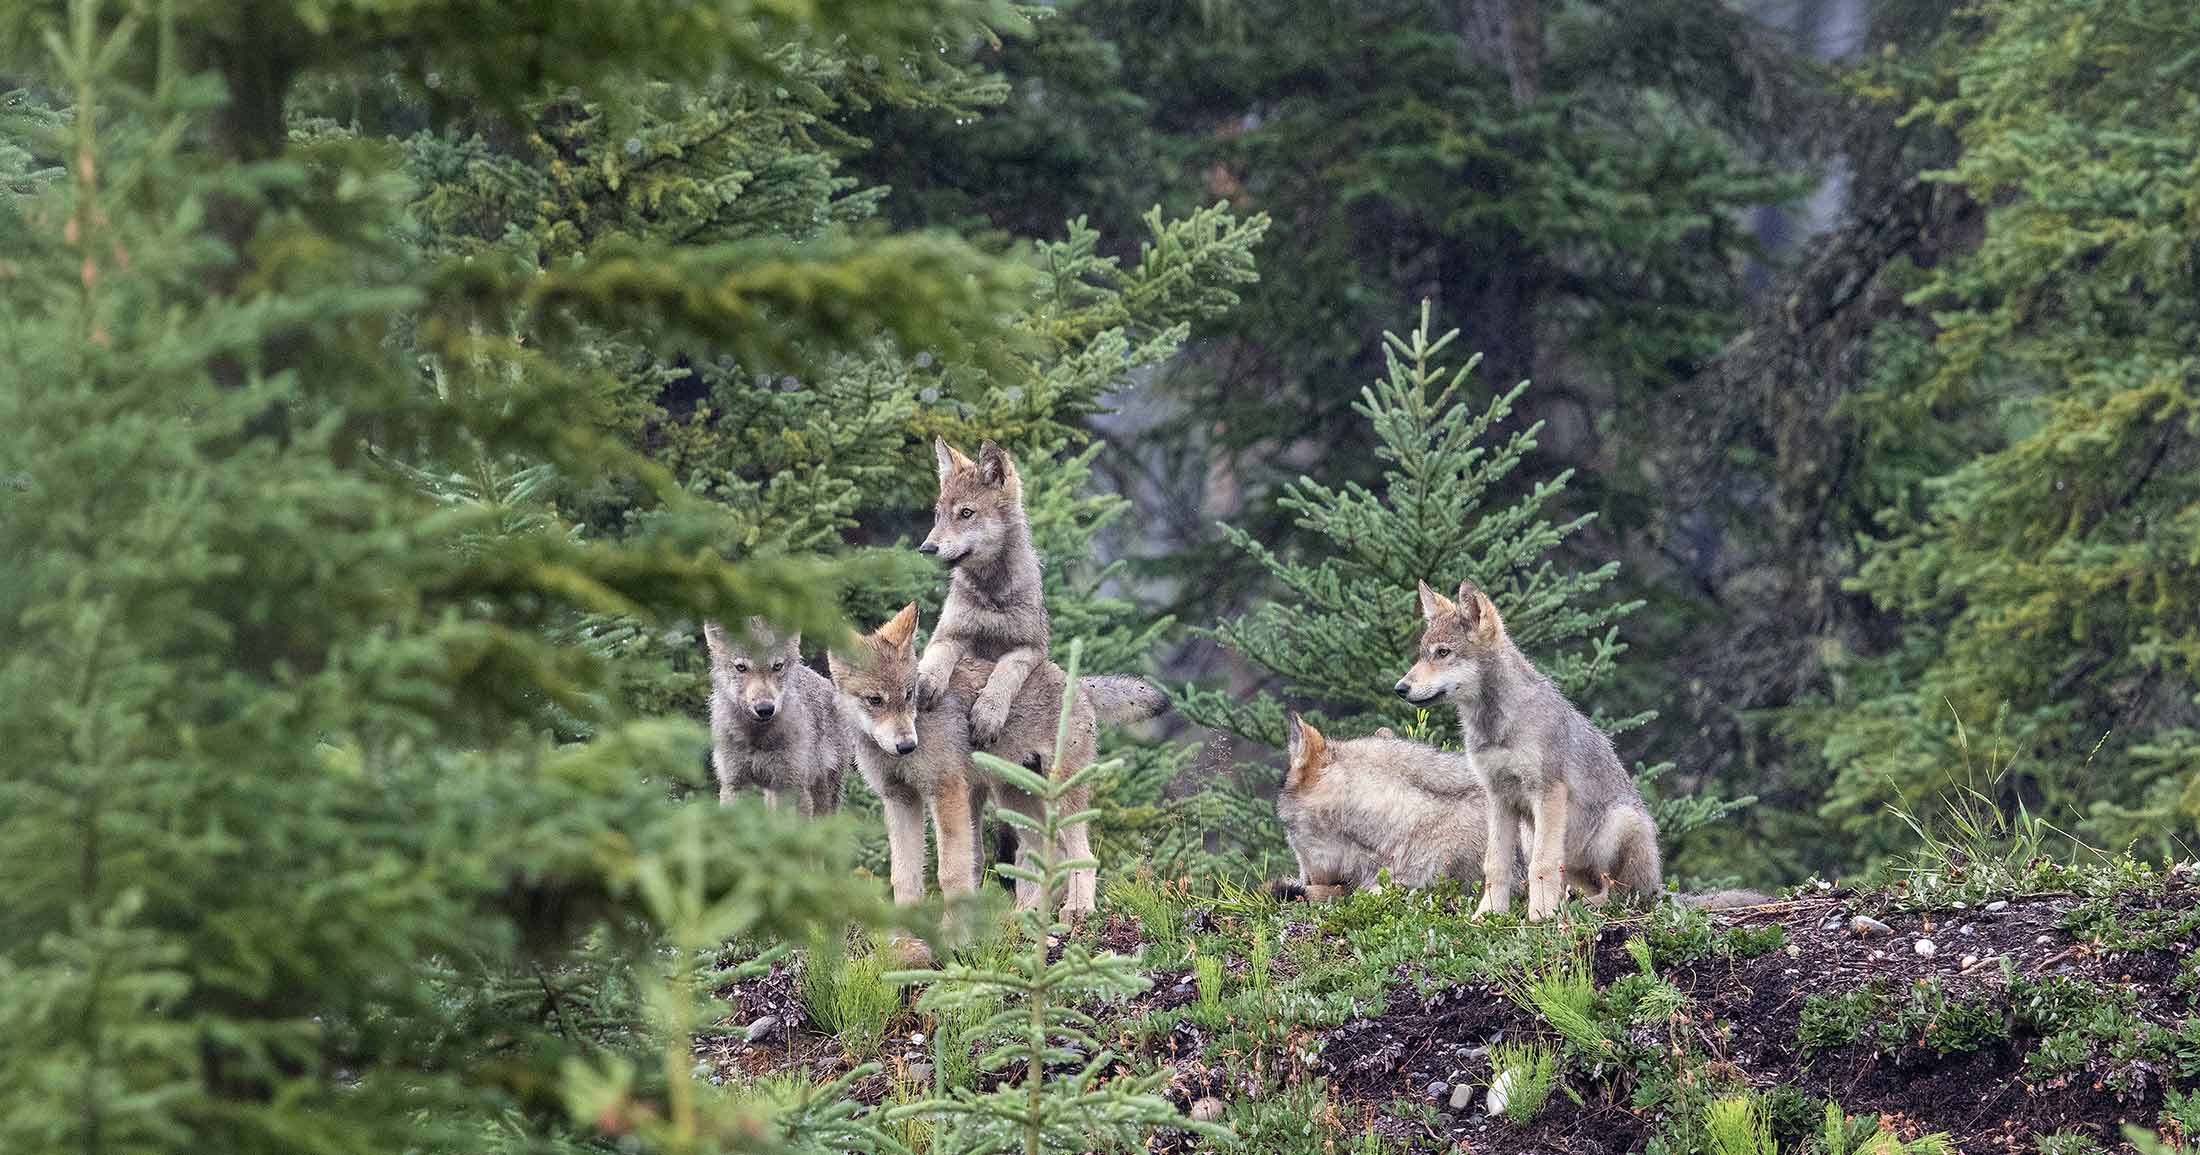 Family of wolves in a forest.